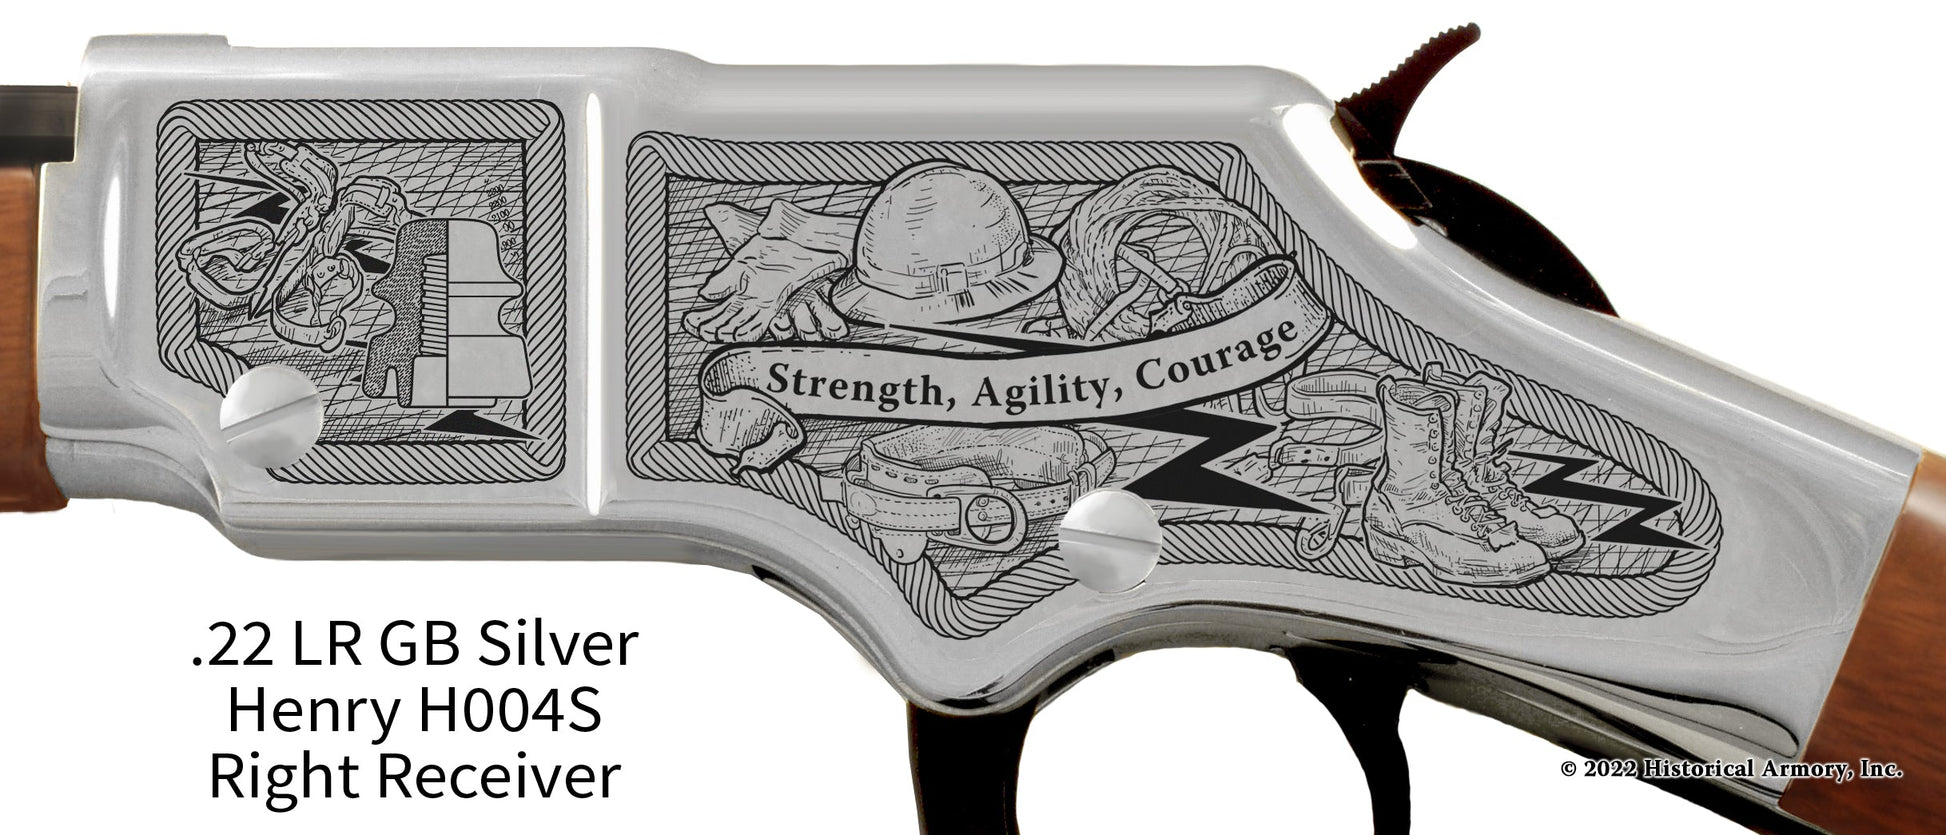 Strength, Agility, Courage - traits of the American Lineman - Golden Boy Silver Henry Rifle Engraving Detail